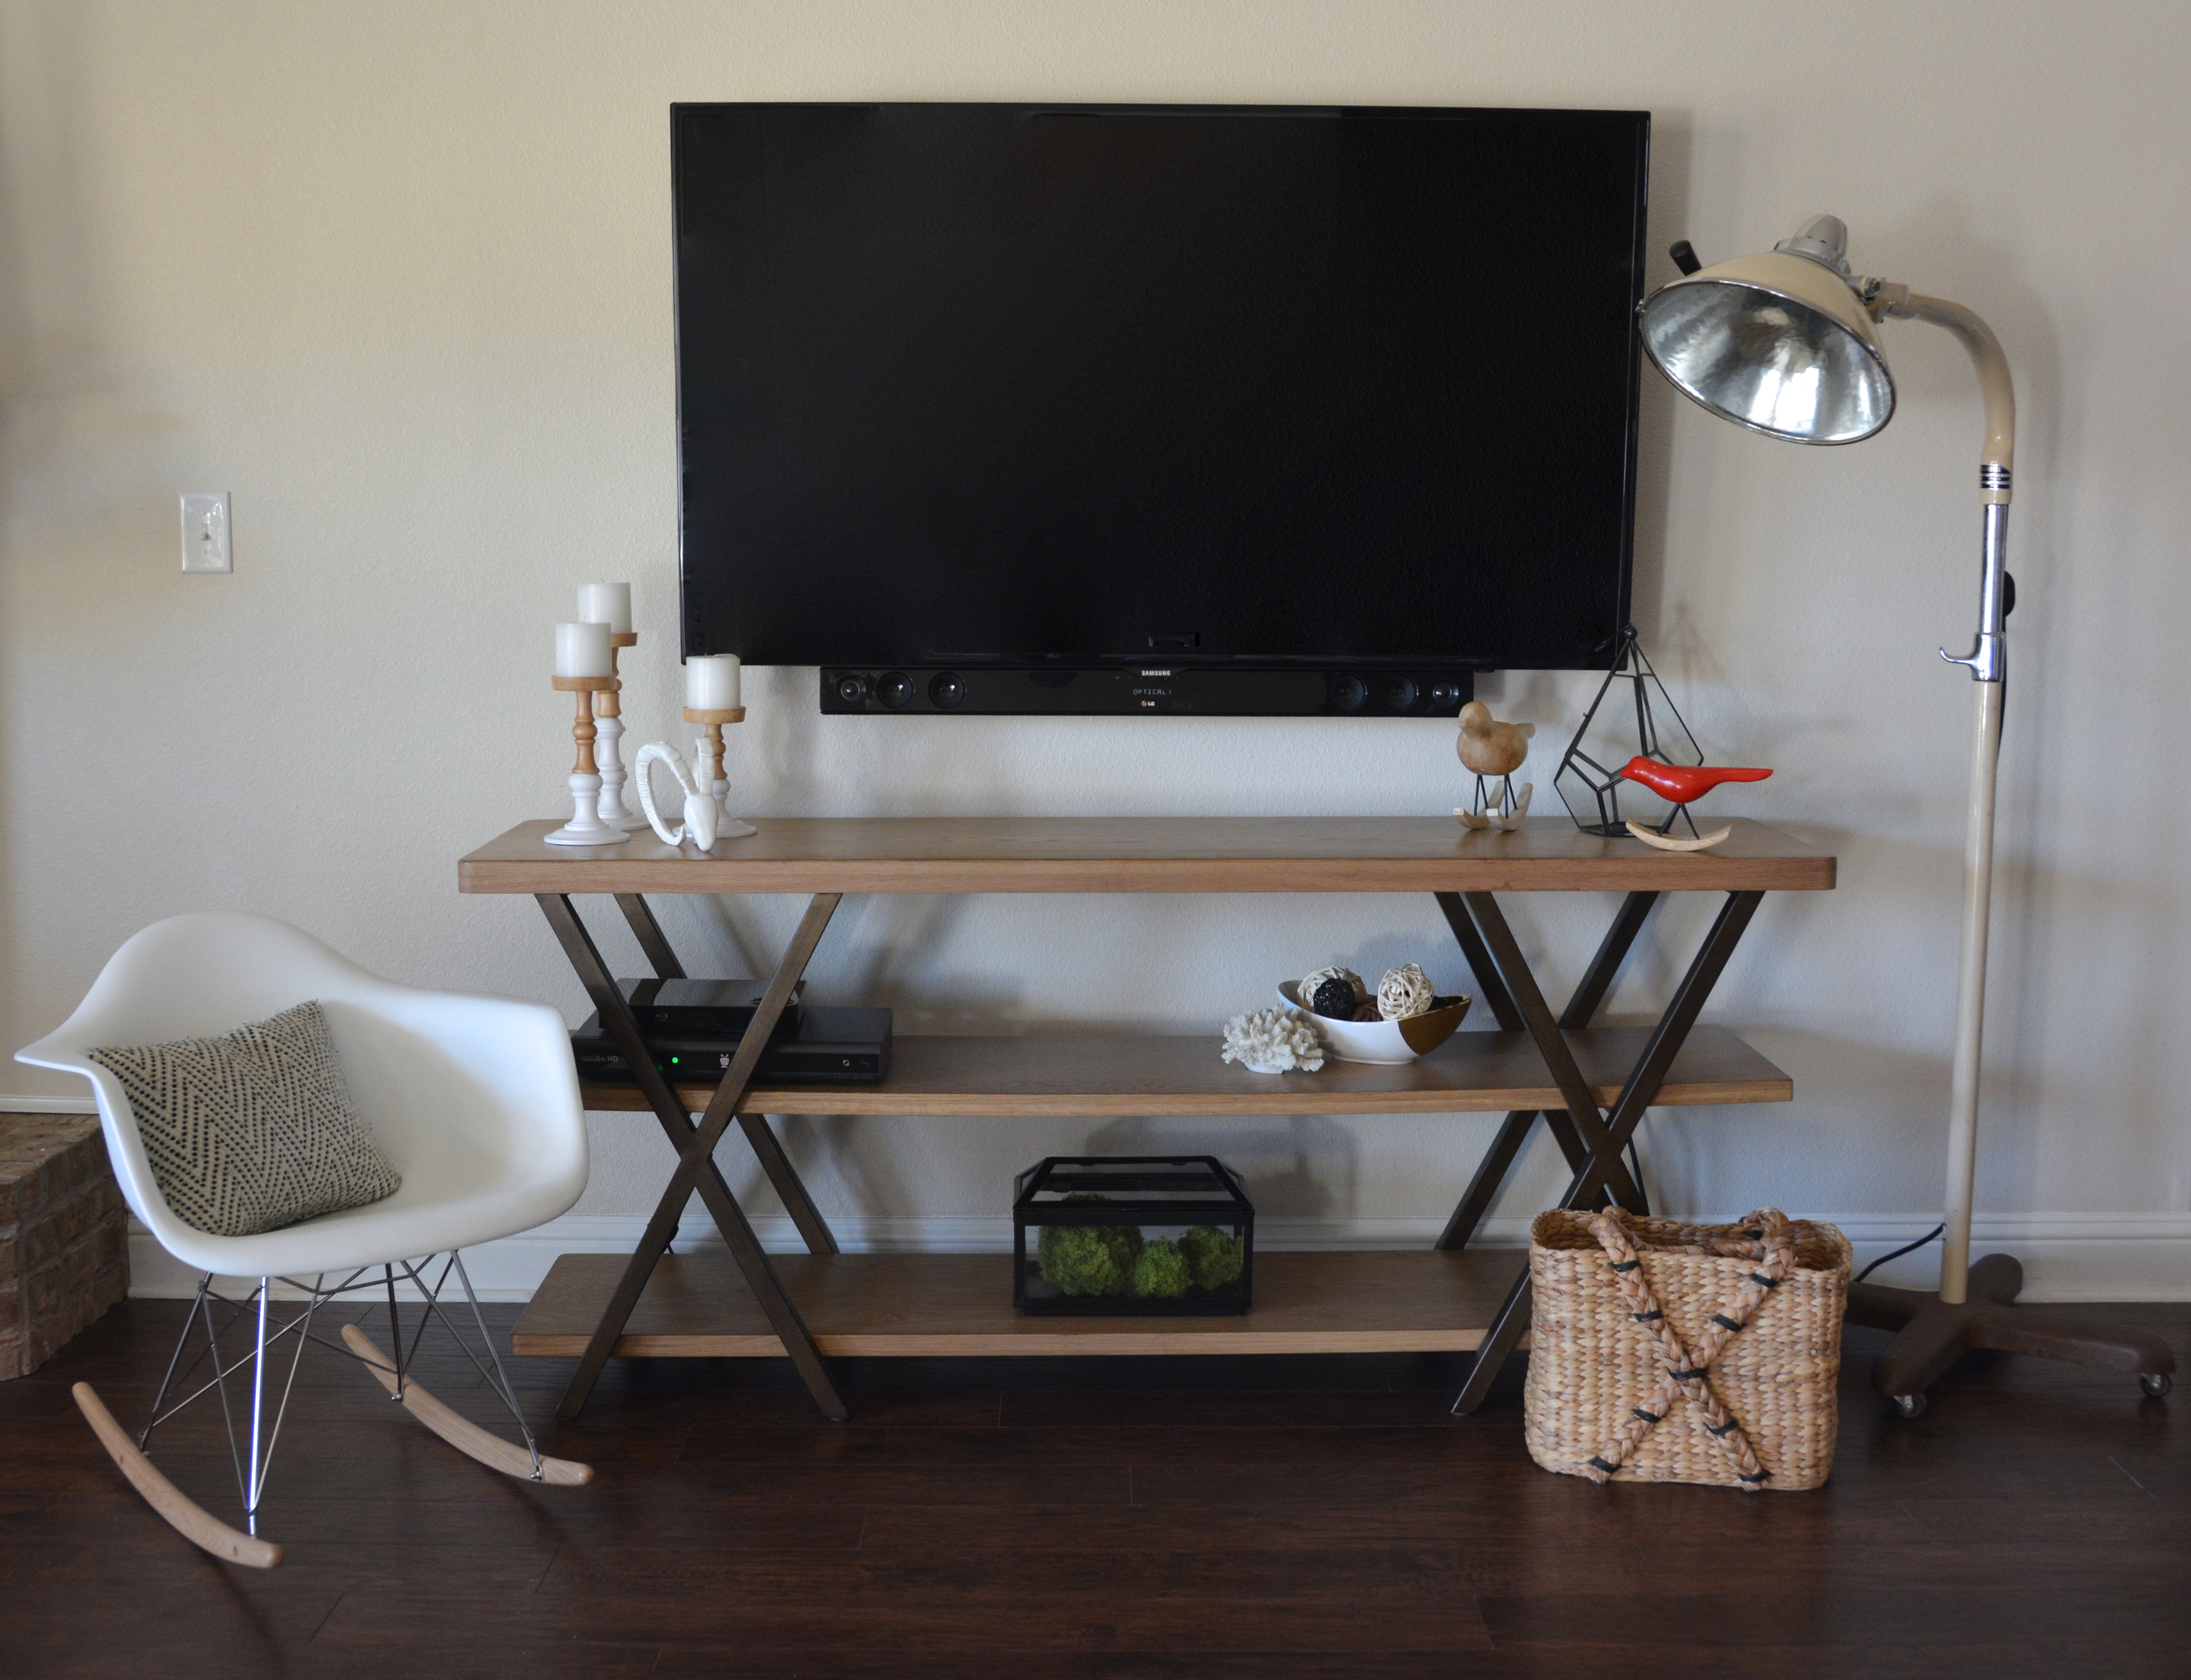 DIY Wall Mounted Television & Hidden Cords - Two Thirty ...